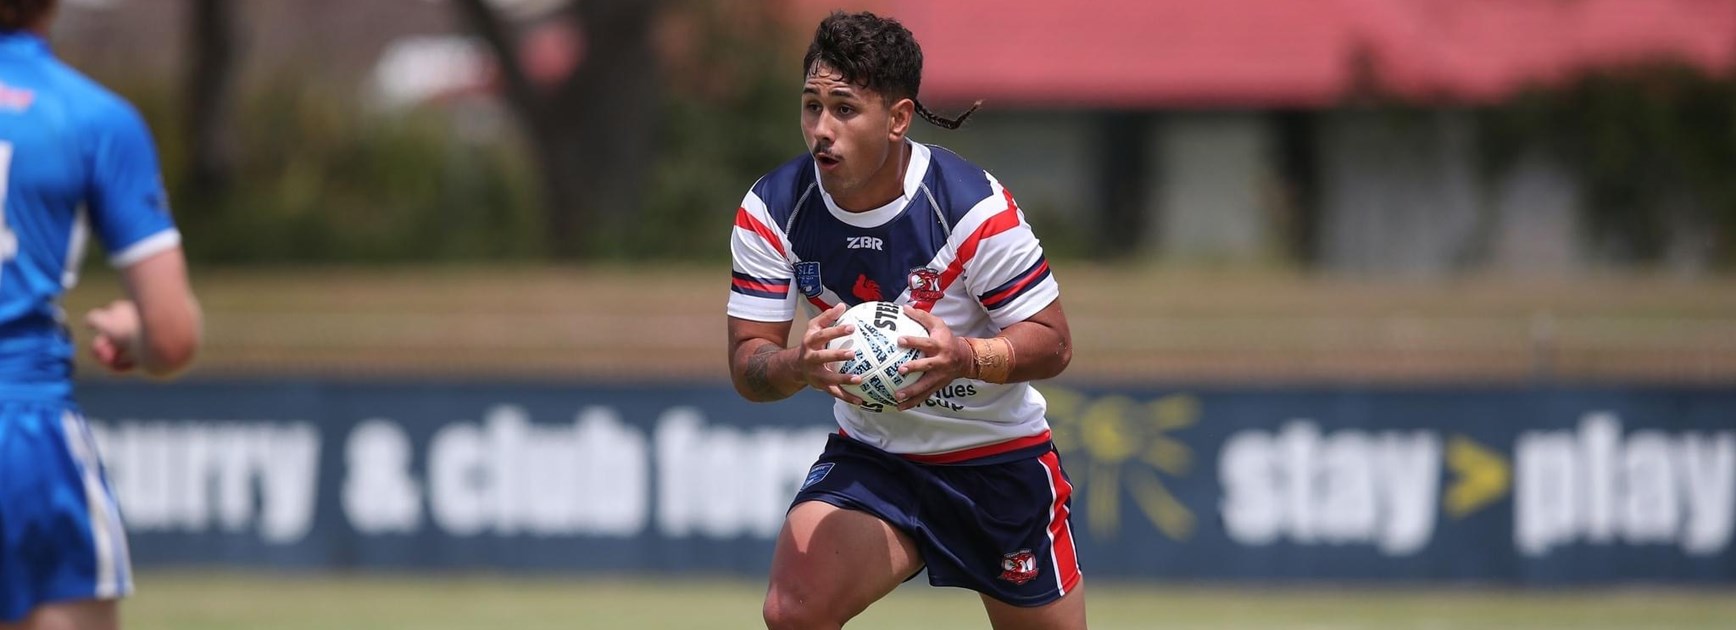 Junior's Report: Roosters Triumph in All Games